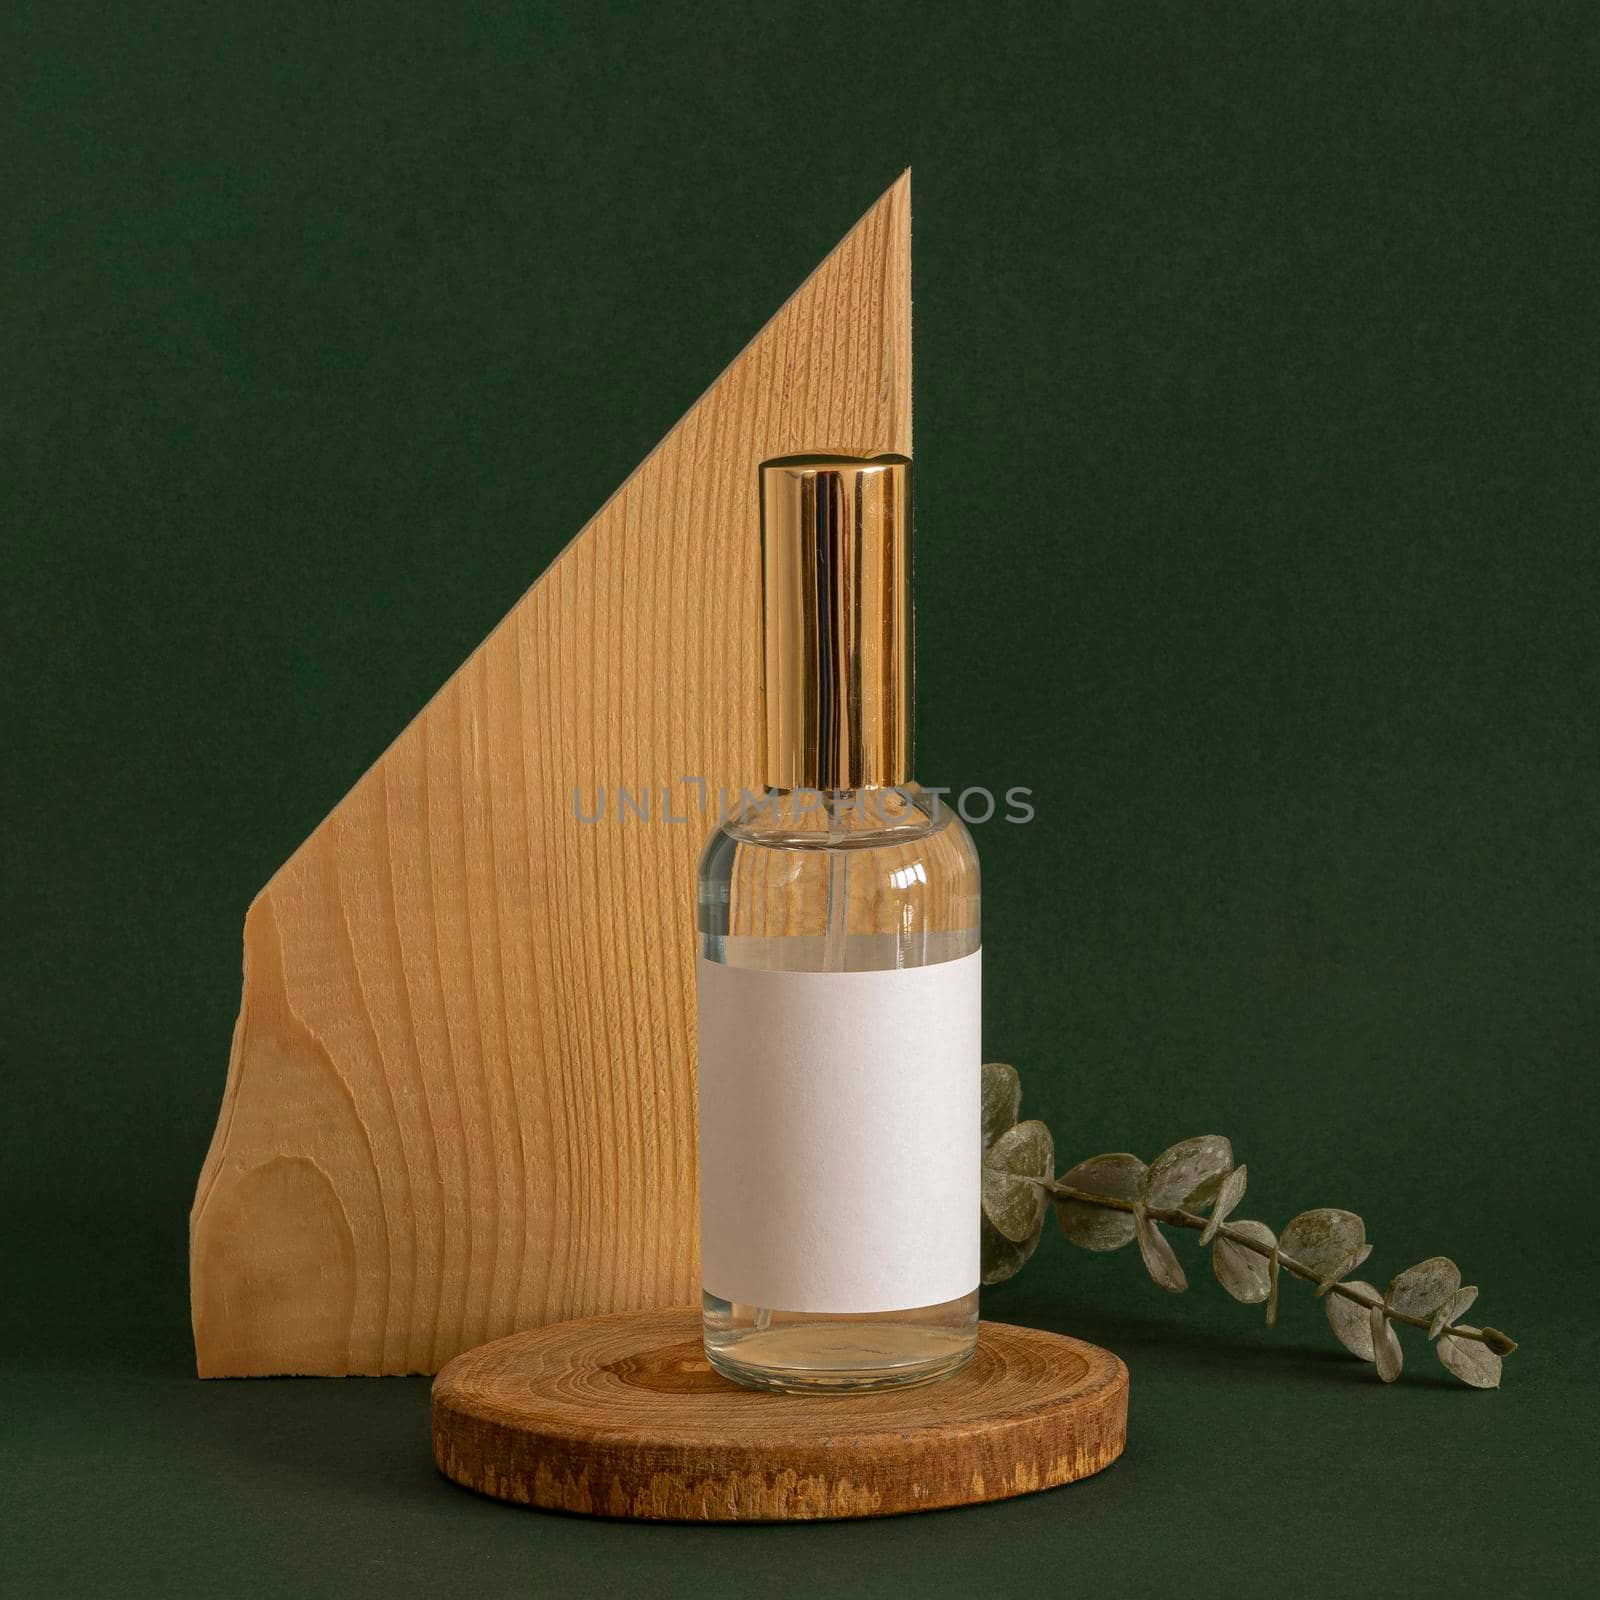 front view skin care product wooden decorative piece by Zahard